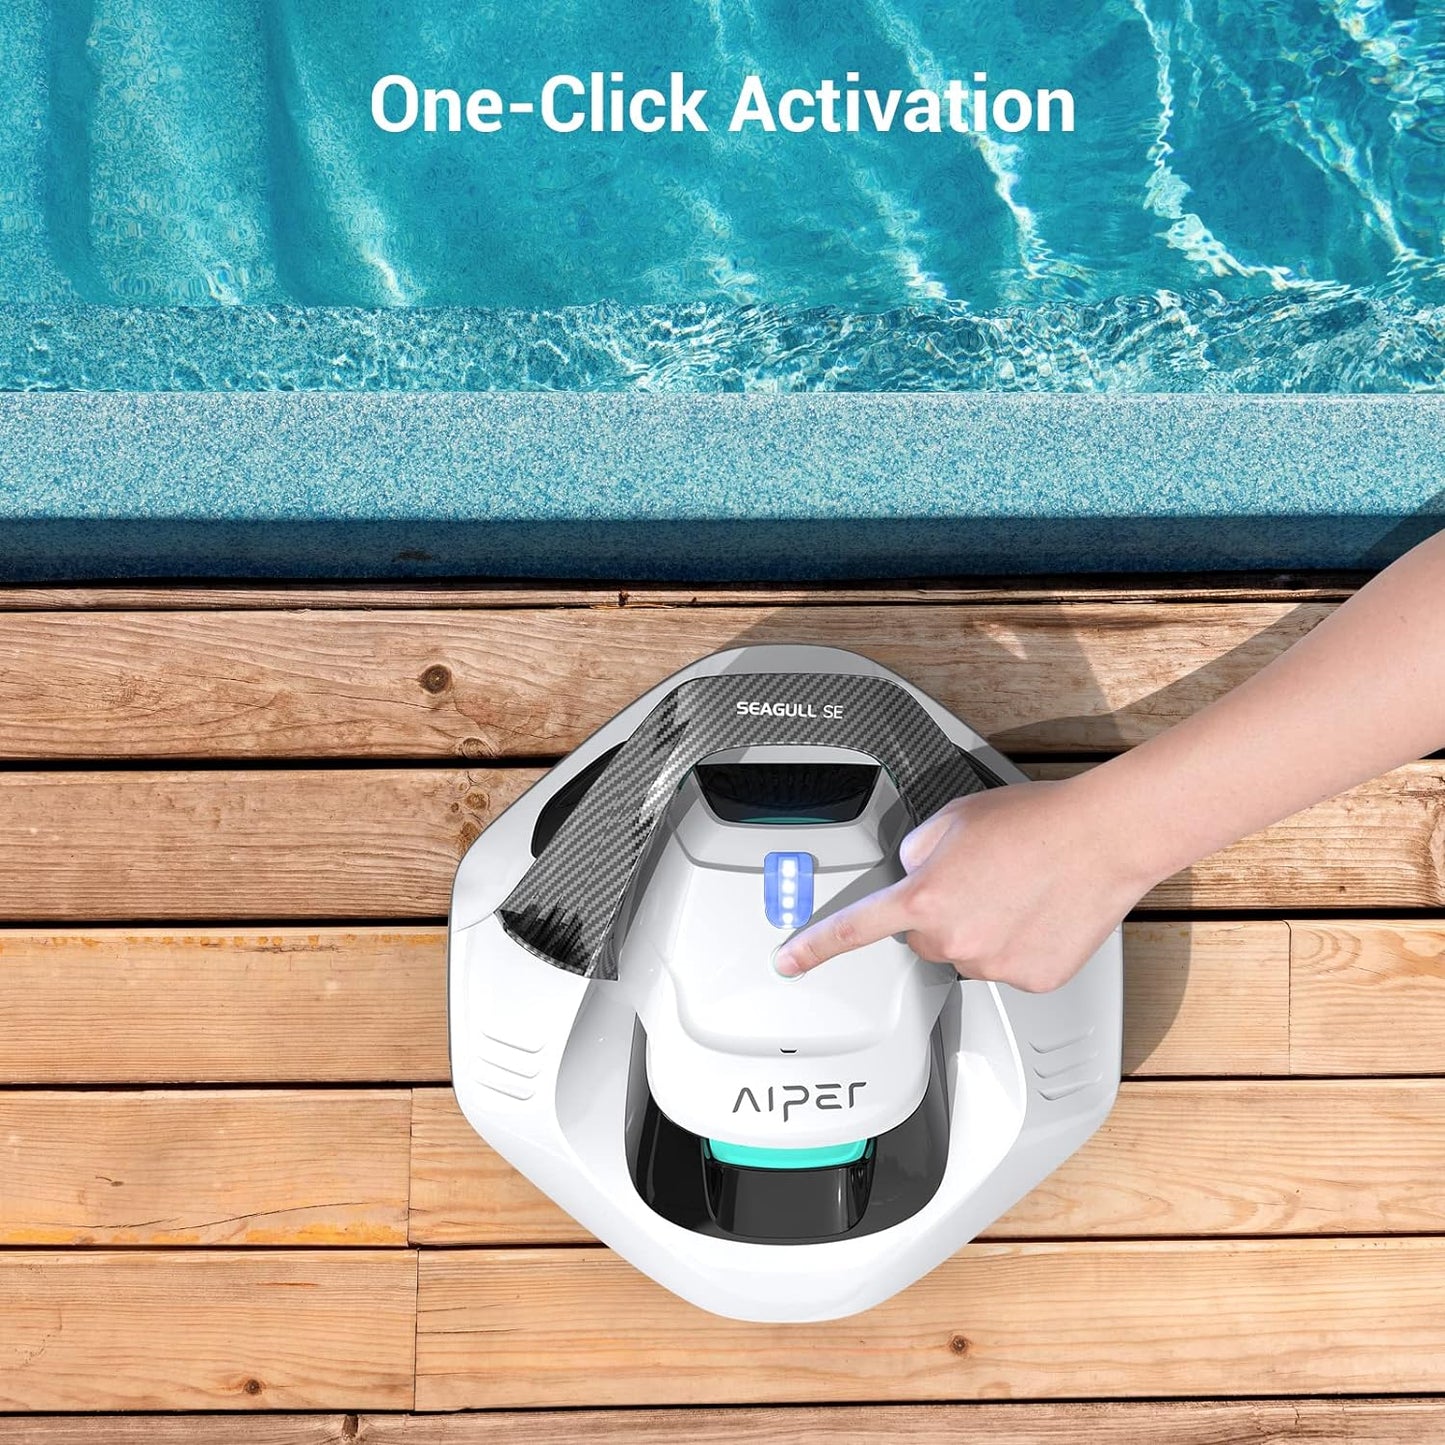 (2023 New) AIPER Seagull SE Cordless Robotic Pool Cleaner, Pool Vacuum Lasts 90 Mins, LED Indicator, Auto-Parking Technology, Ideal for Above/In-Ground Flat Pools up to 40ft- White